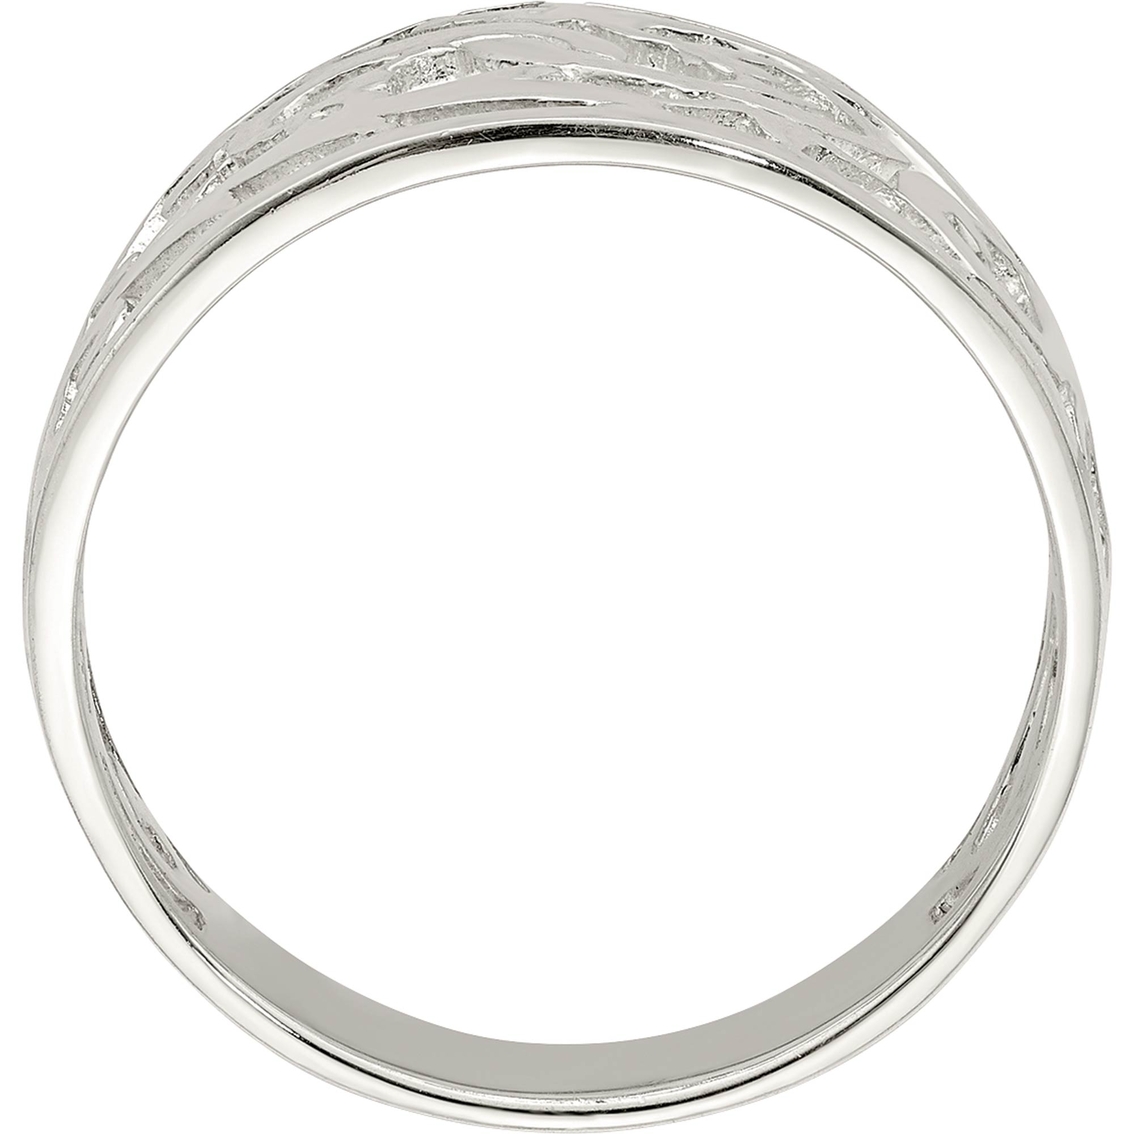 Sterling Silver Swirl Ring - Image 2 of 5